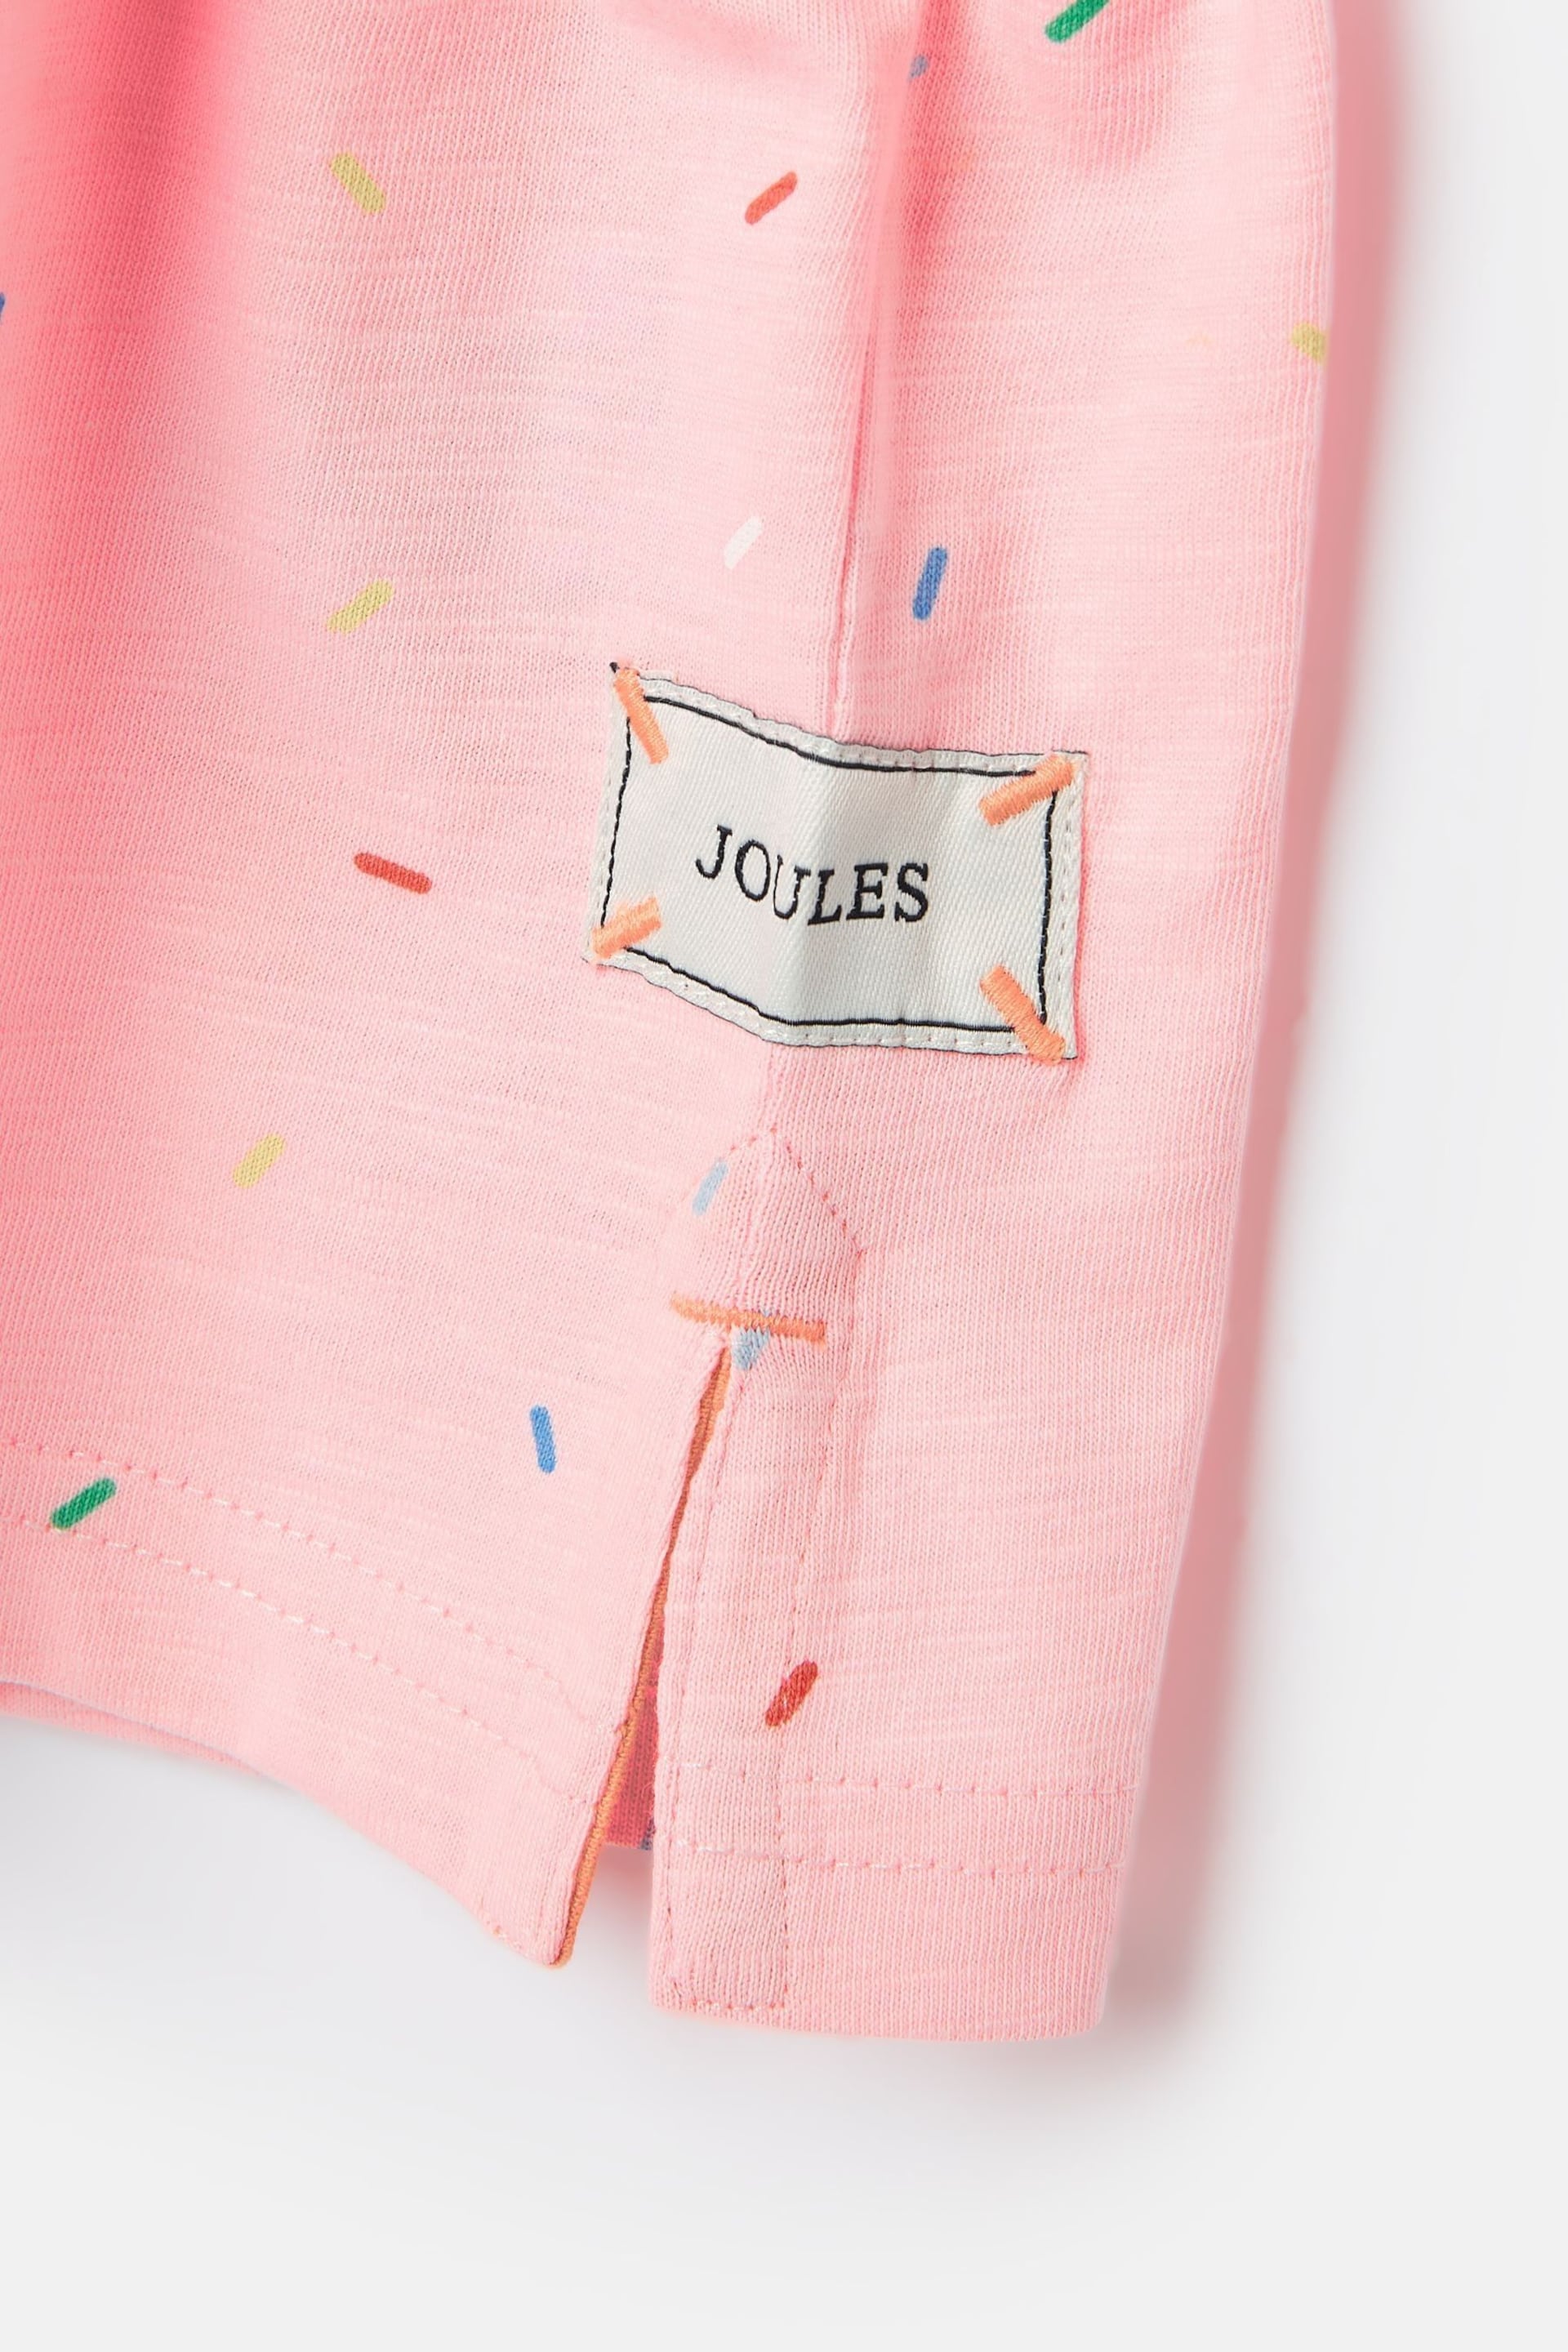 Joules Fun Days Pink Short Sleeve Graphic T-shirt - Image 5 of 7